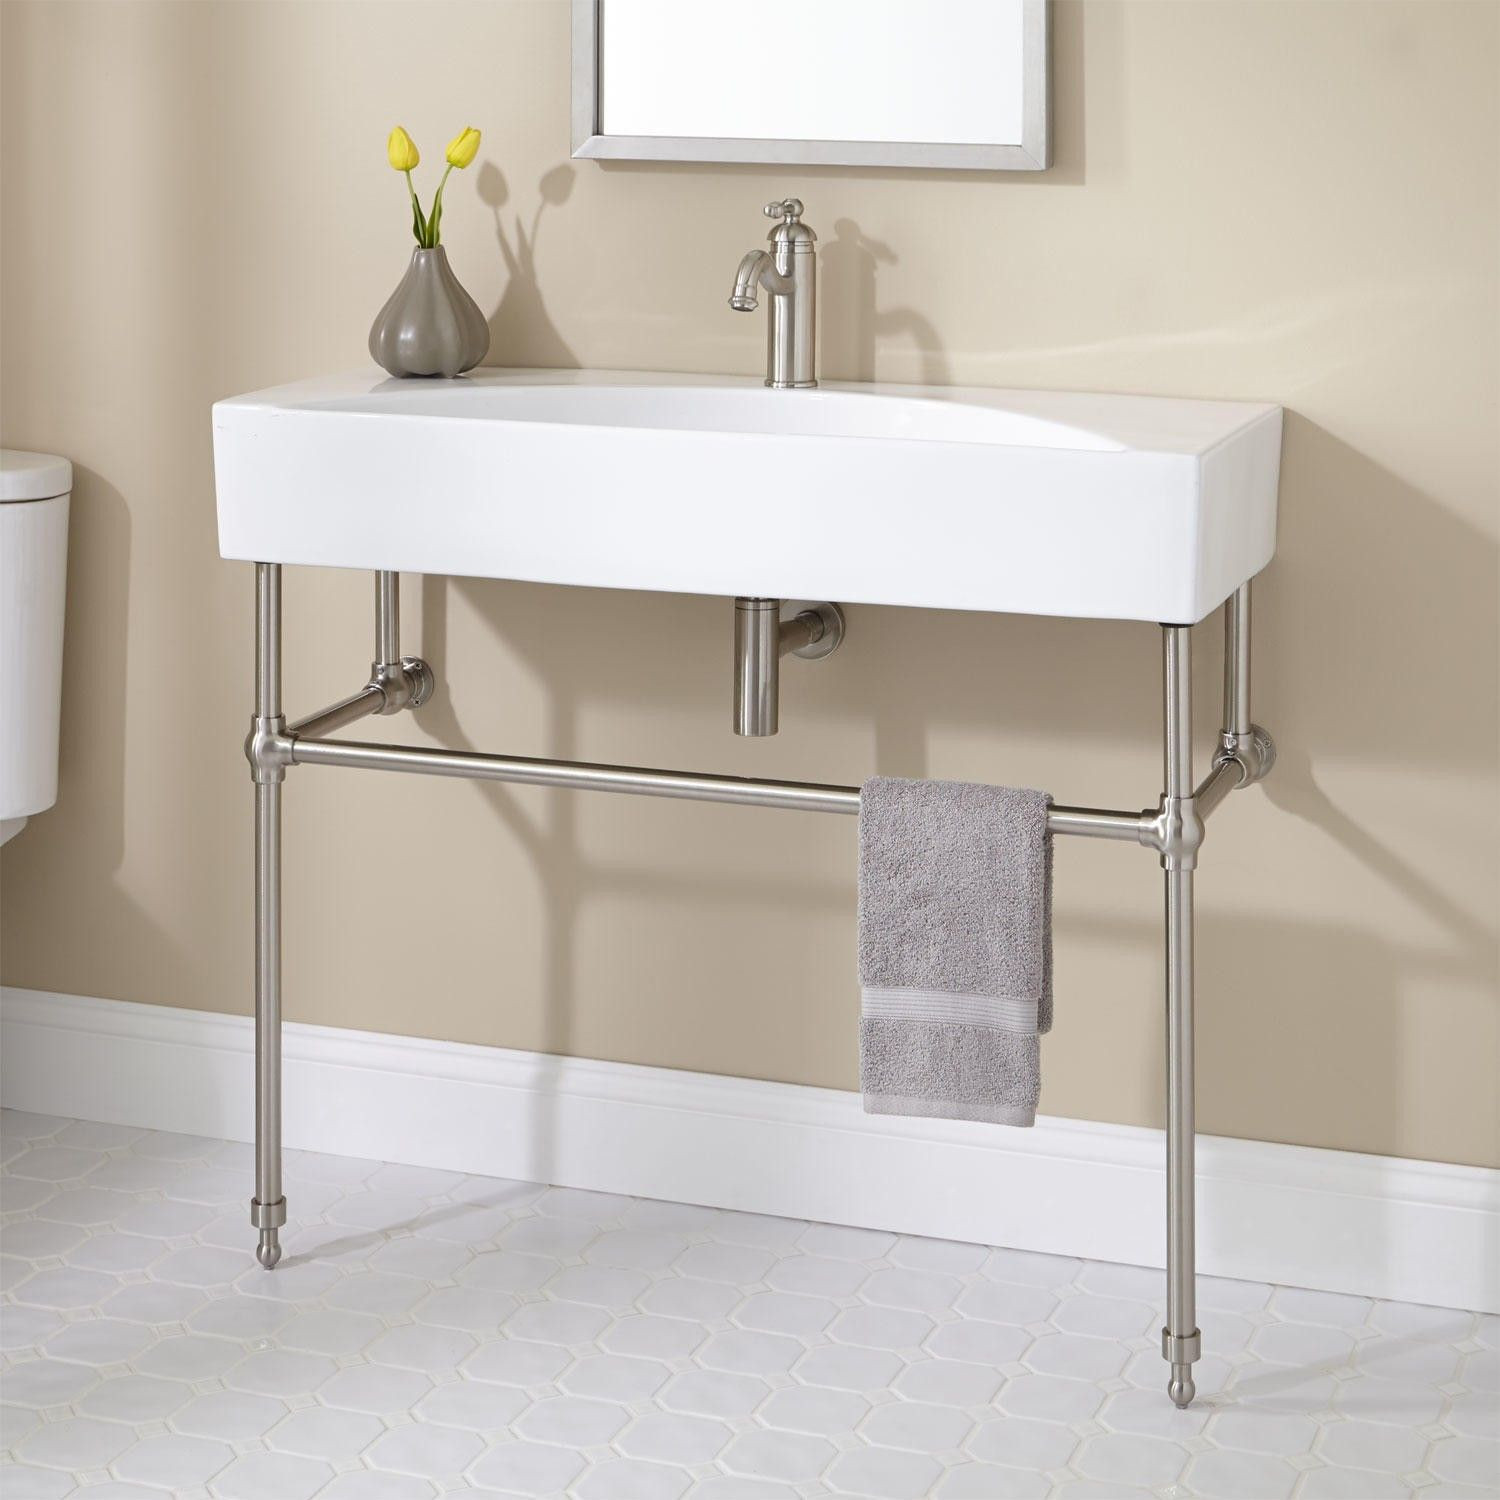 Console Sink Bathroom
 Zita Console Sink with Brass Stand Console Sinks